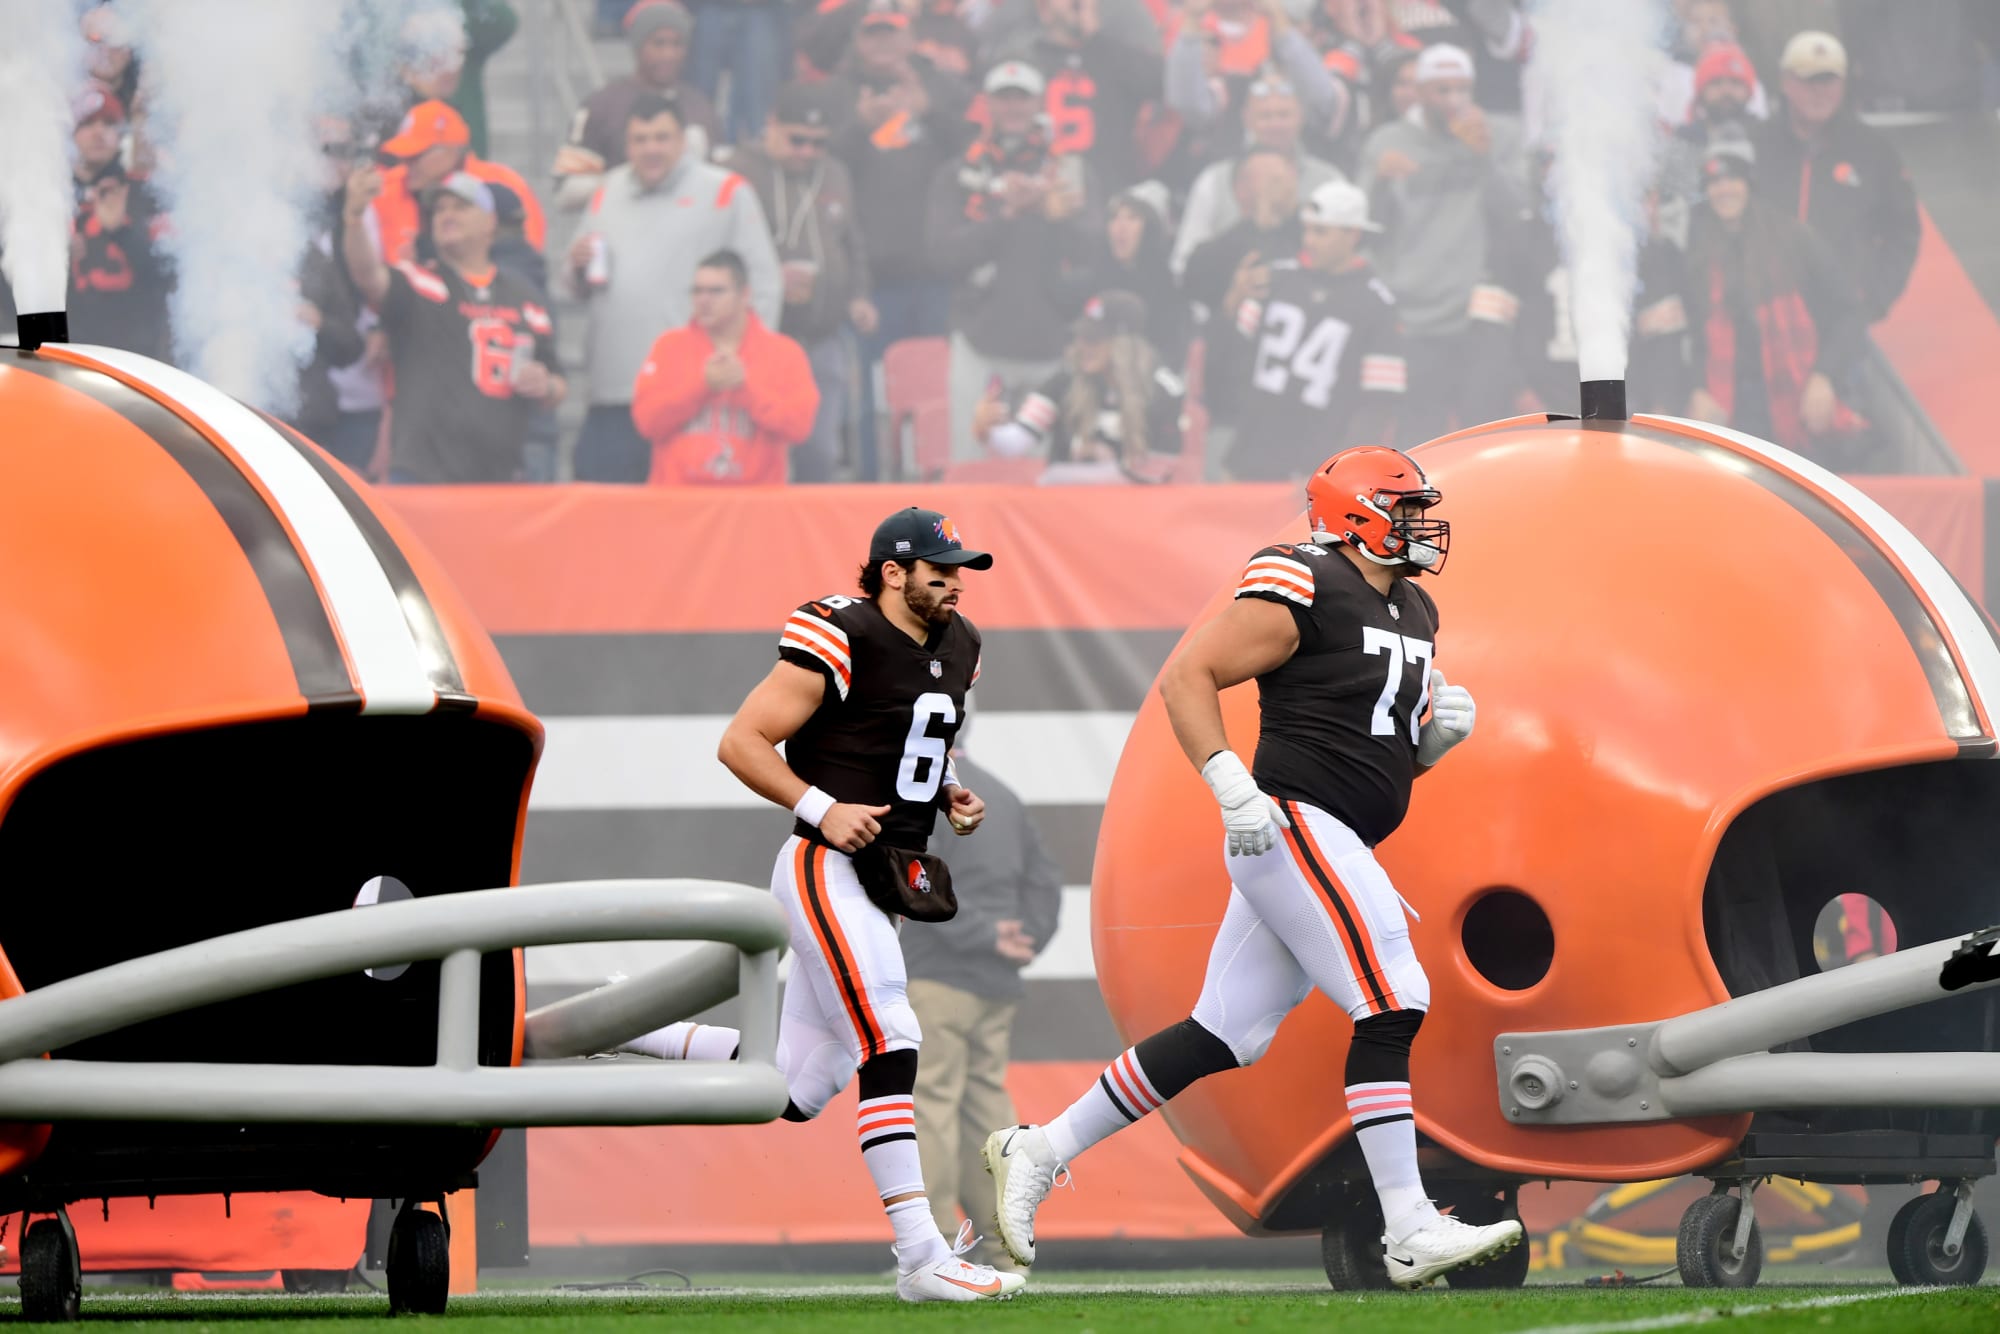 Ranking and grading every offensive linemen on the Cleveland Browns